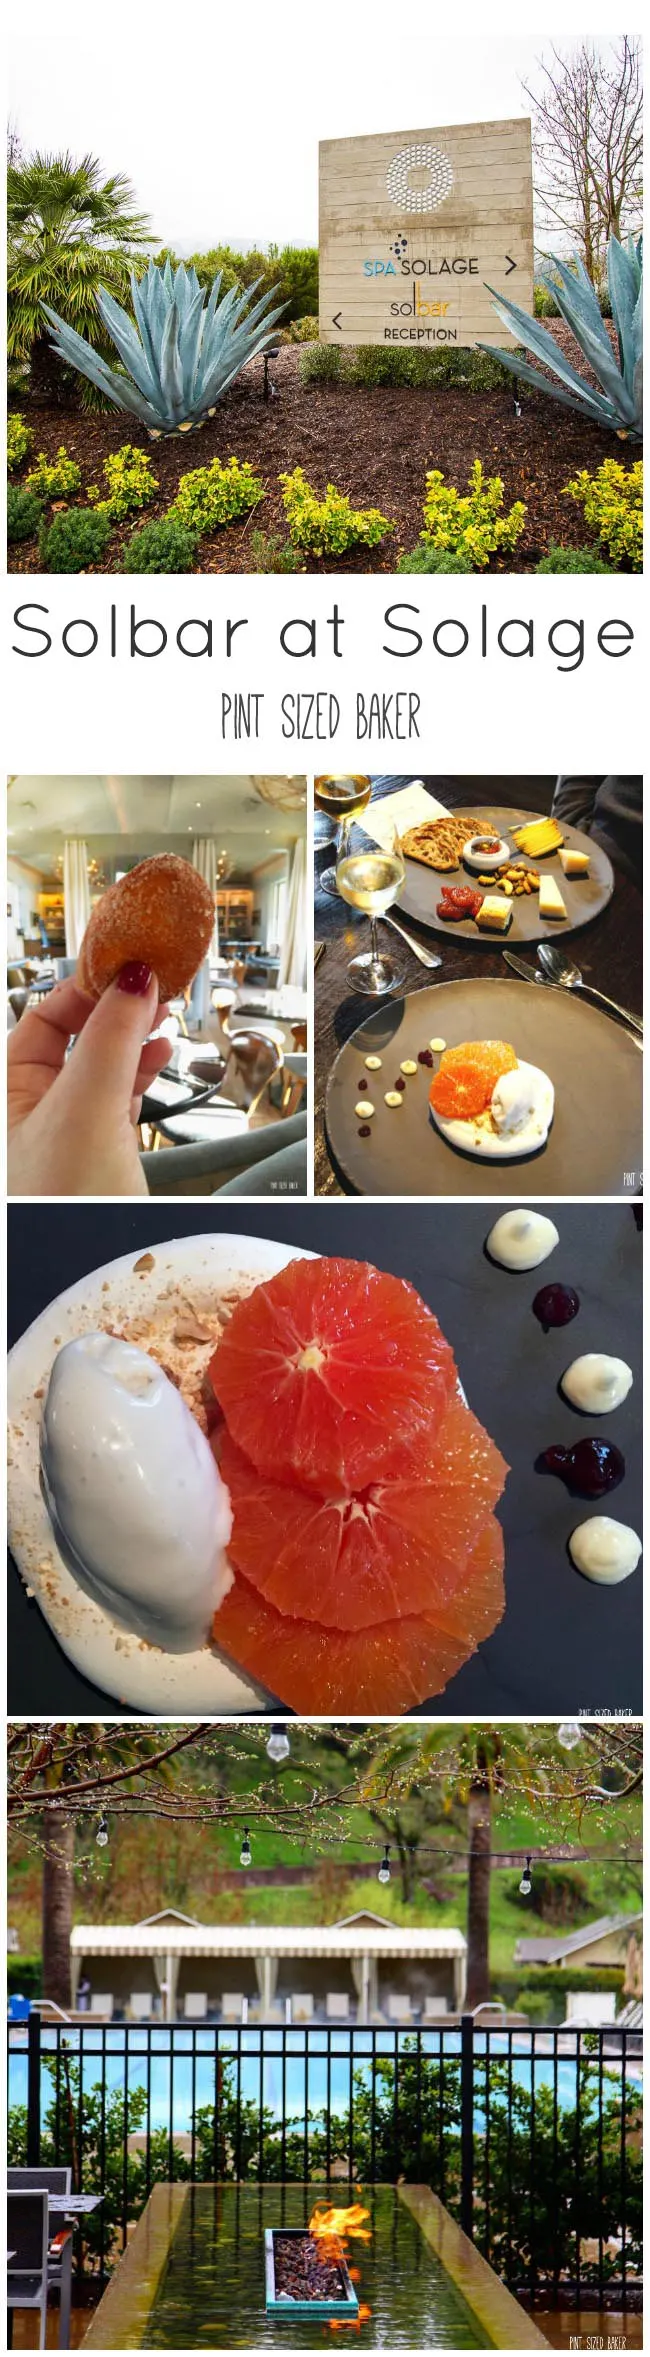 Breakfast to dessert was all mouthwatering at the Solbar located at the Solage Resort in Calistoga, California. This Michelin-star rated restaurant serves decadent food in an awesome location.